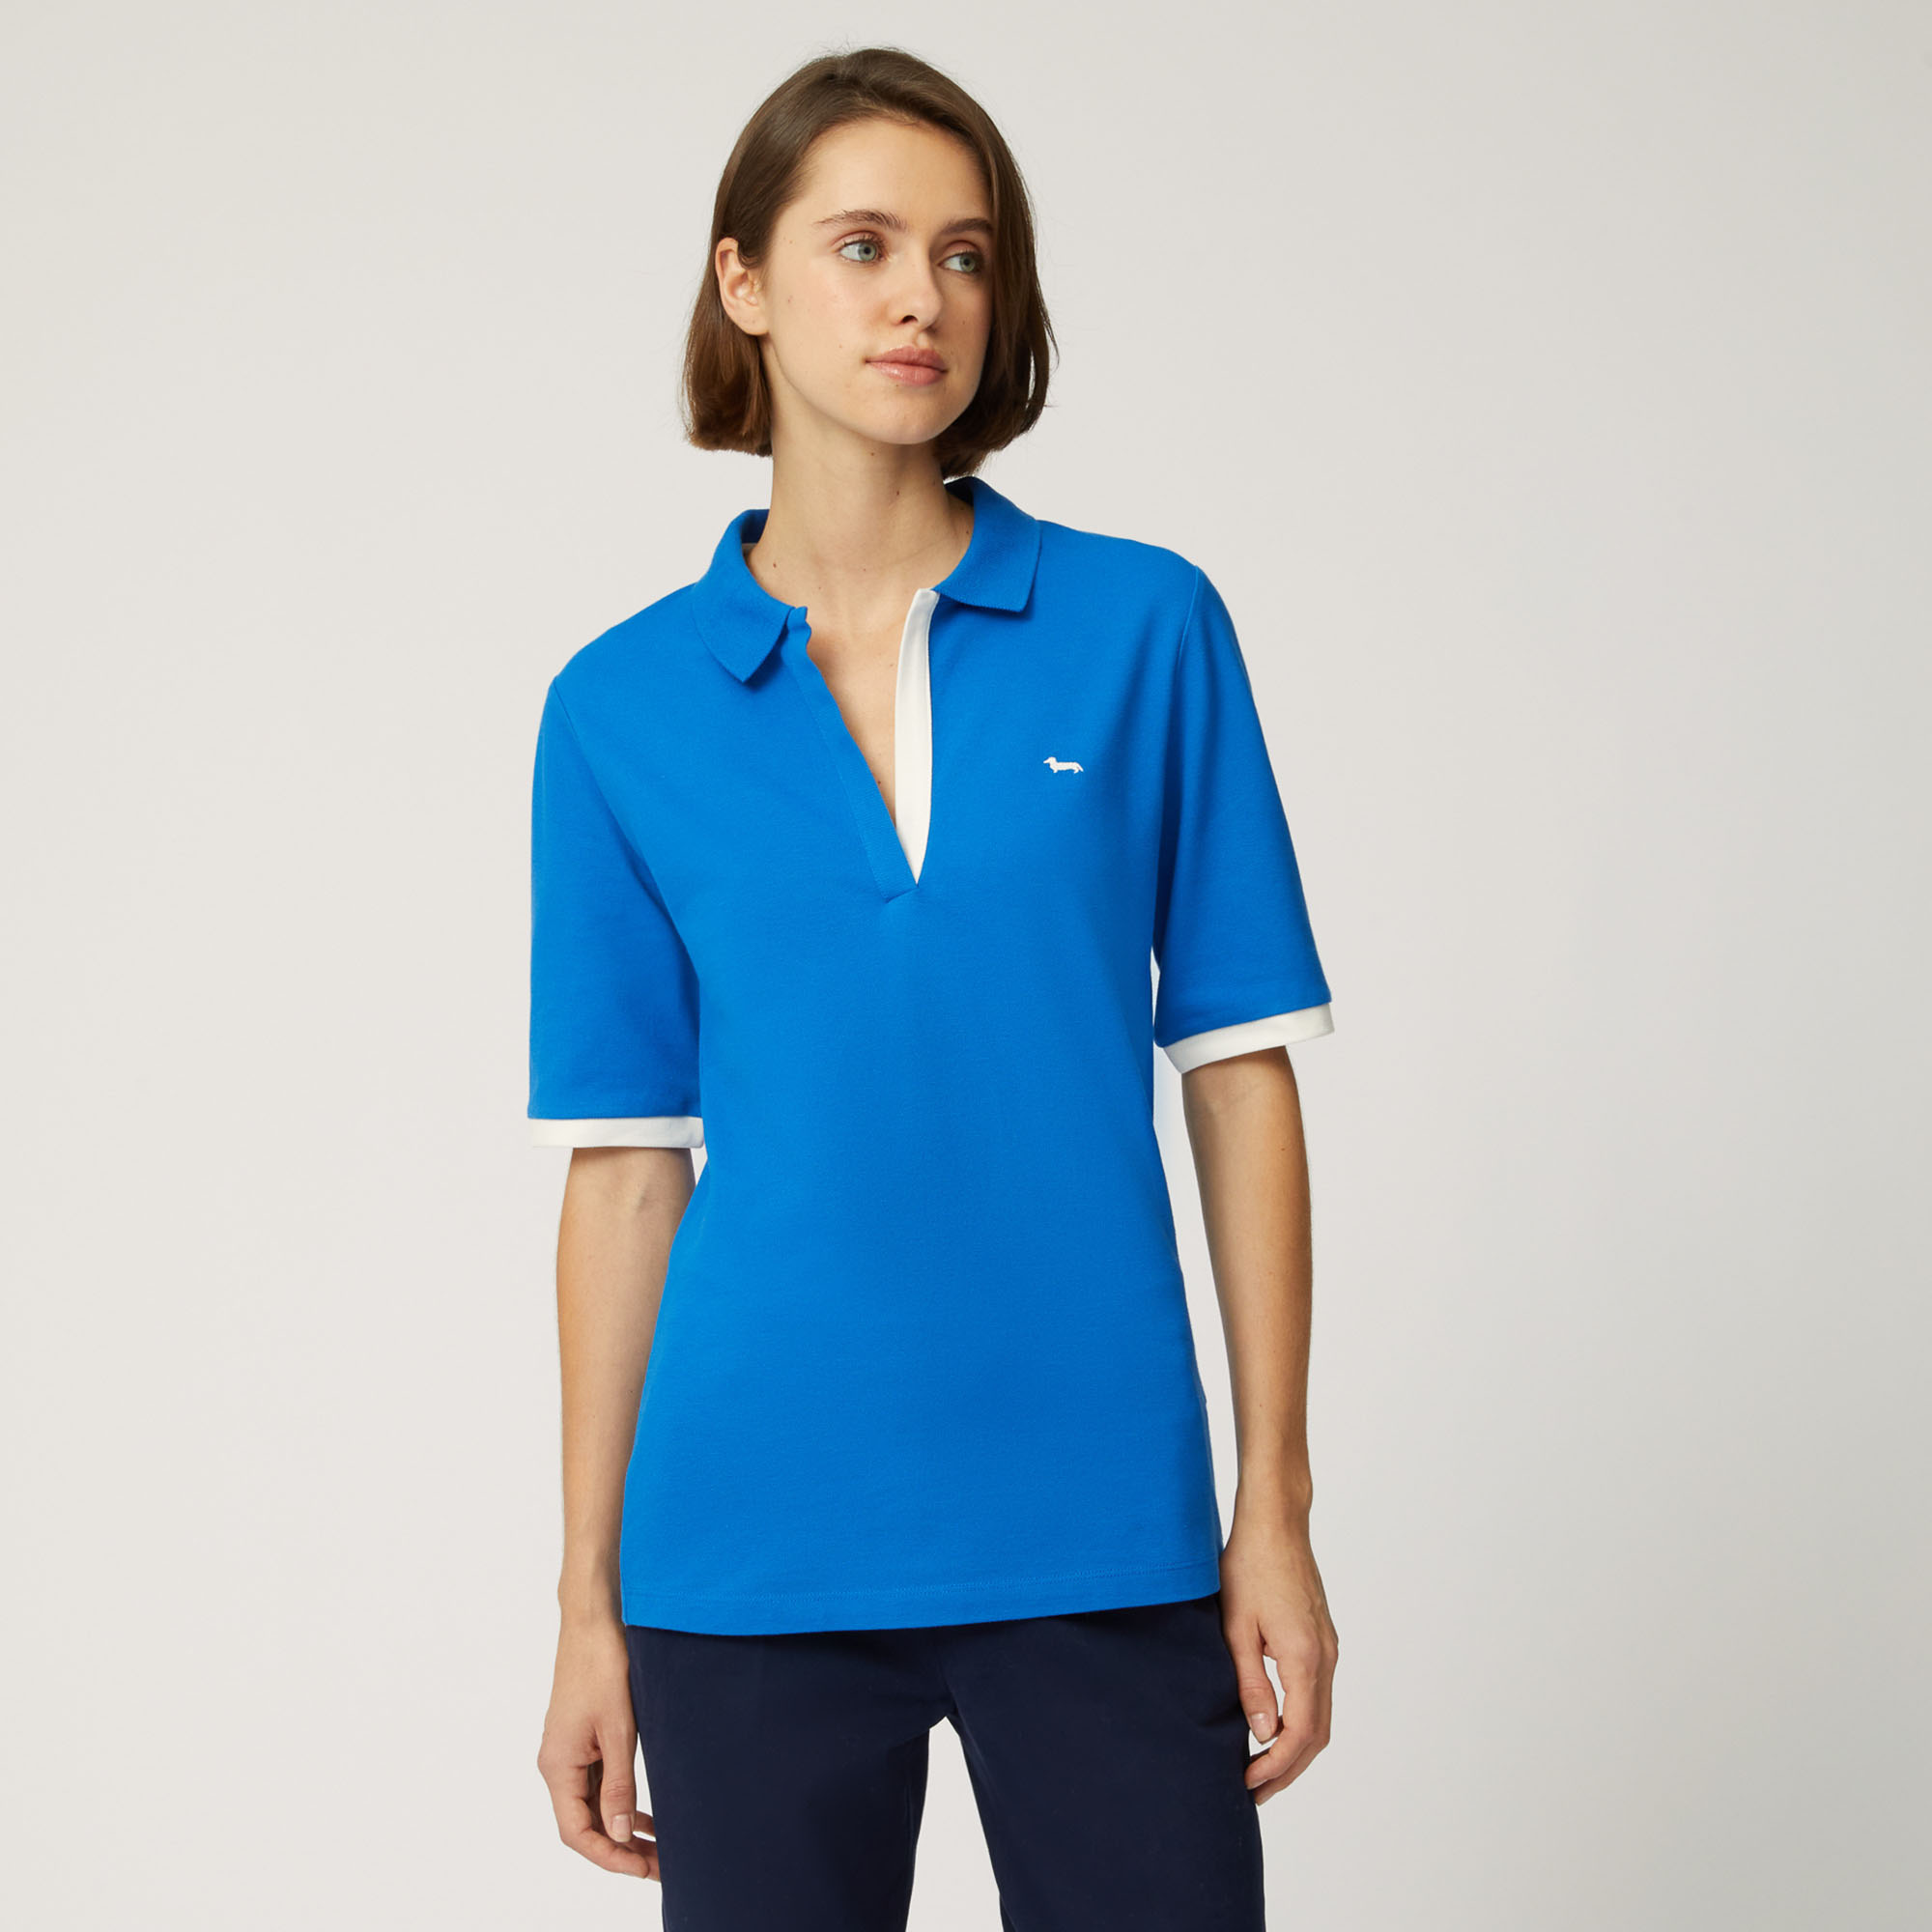 Polo Shirt With Contrasting Details, Light Blue, large